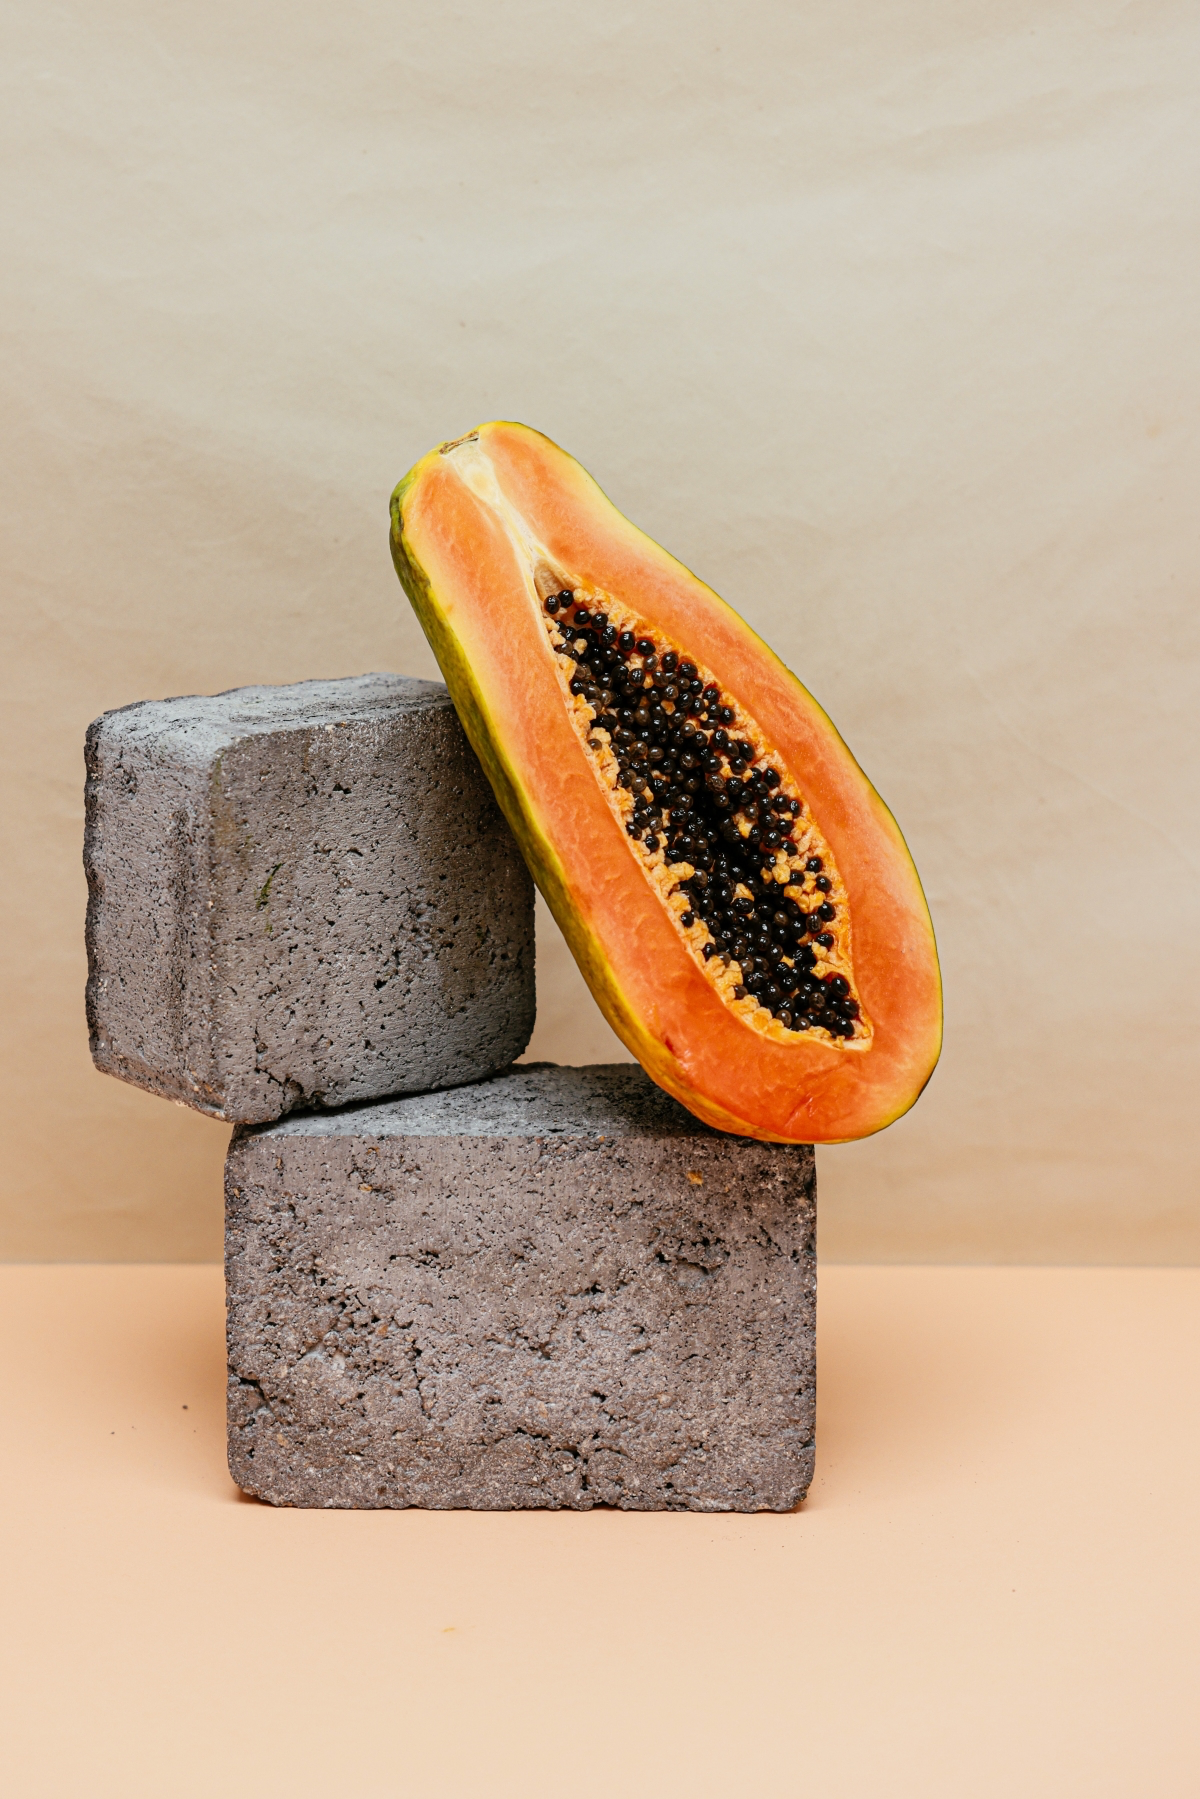 what are the benefits of eating papaya everyday